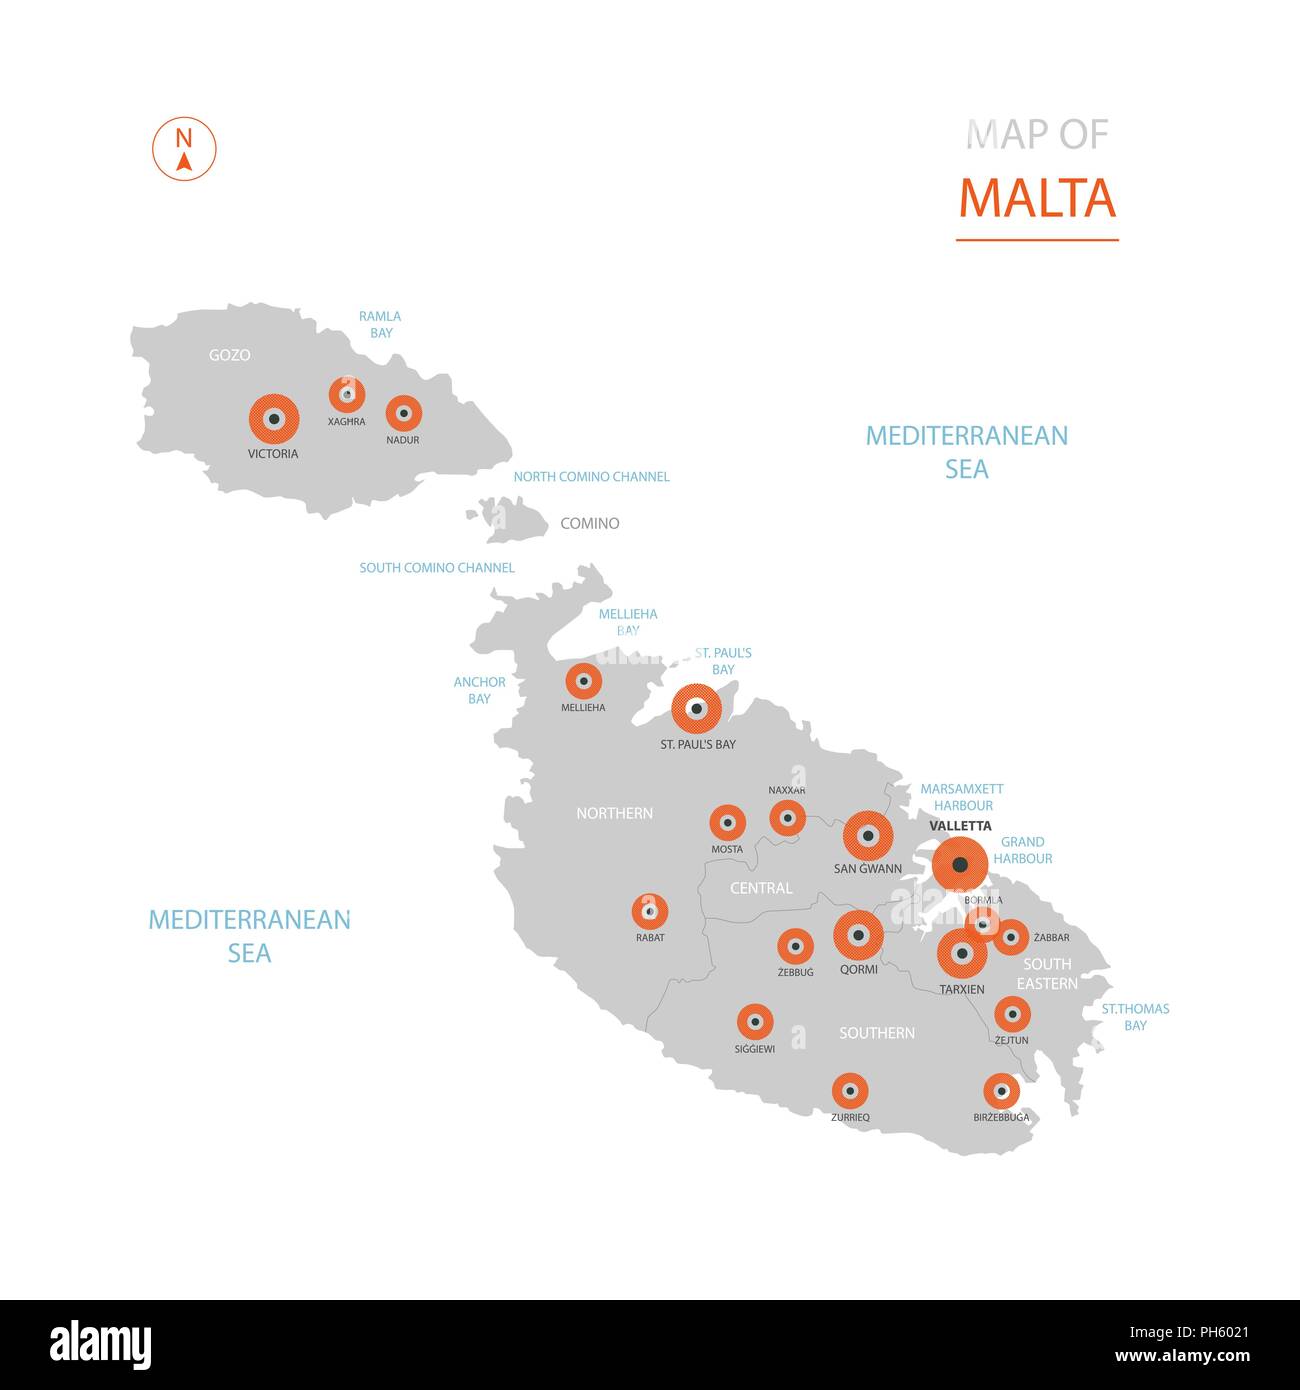 Stylized vector Malta map showing big cities, capital Valletta, administrative divisions. Stock Vector